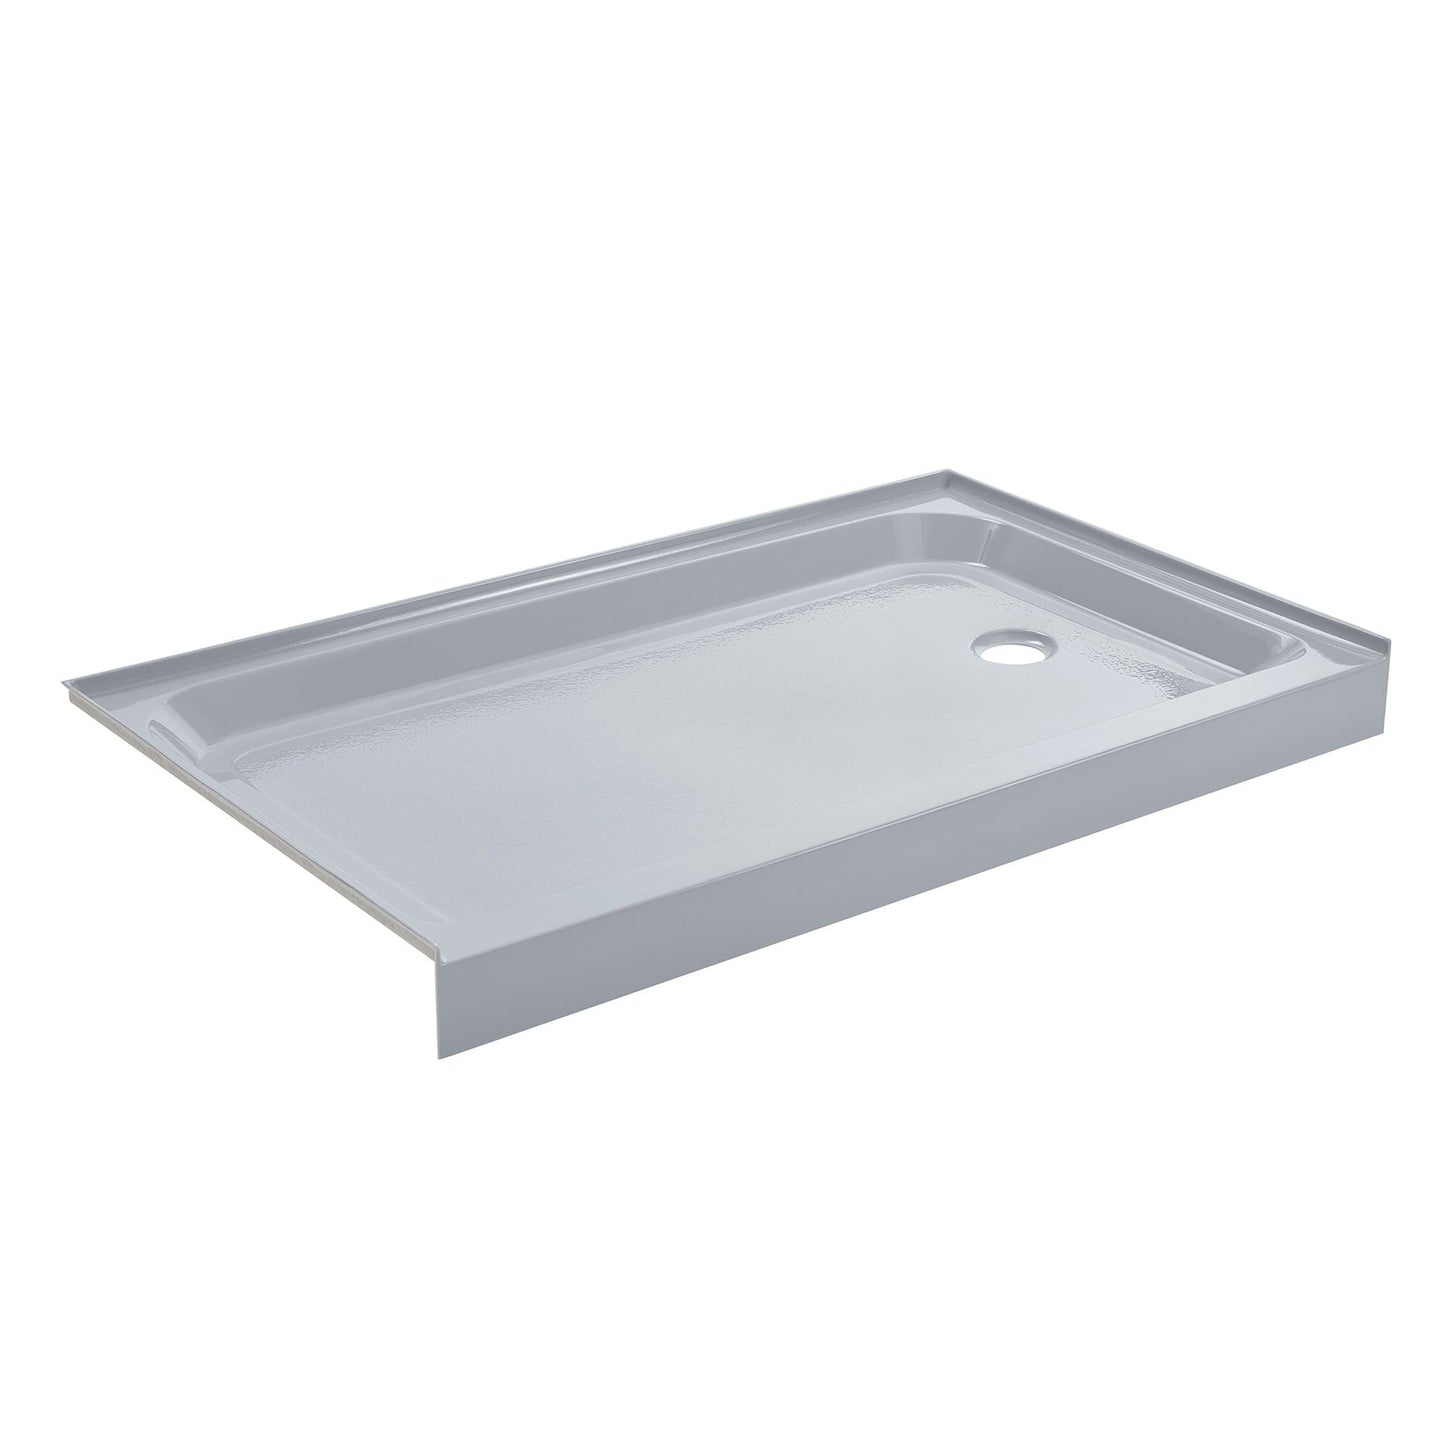 Swiss Madison Voltaire 60" x 36" Three-Wall Alcove Gray Right-Hand Drain Shower Base With Built-In Integral Flange